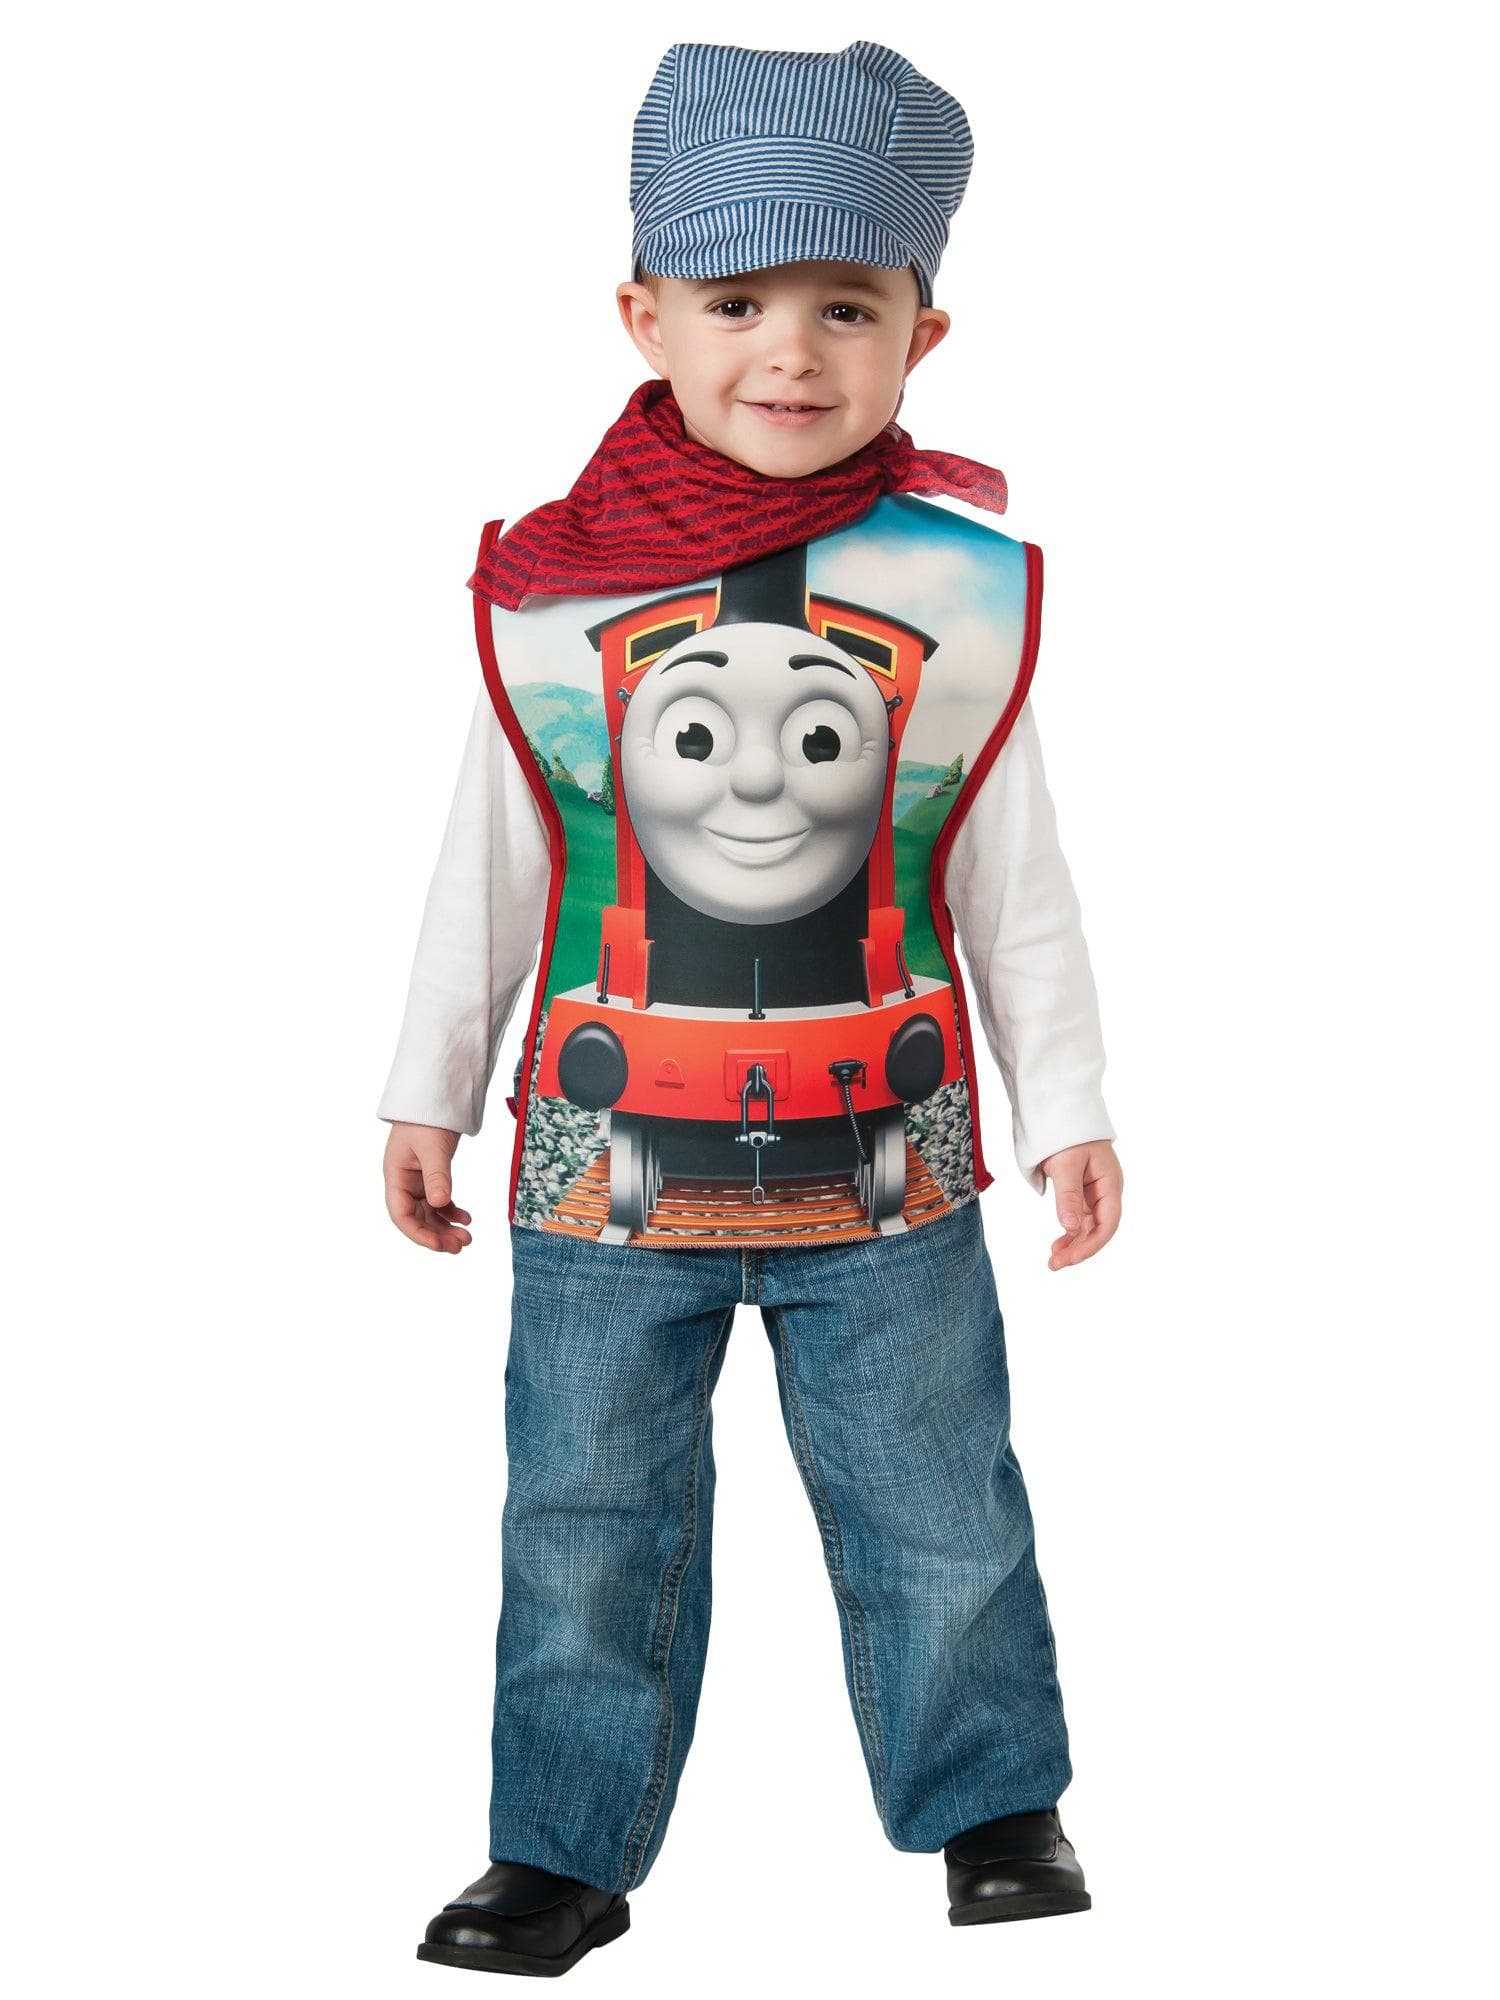 Thomas The Tank James Costume for Toddlers - costumes.com